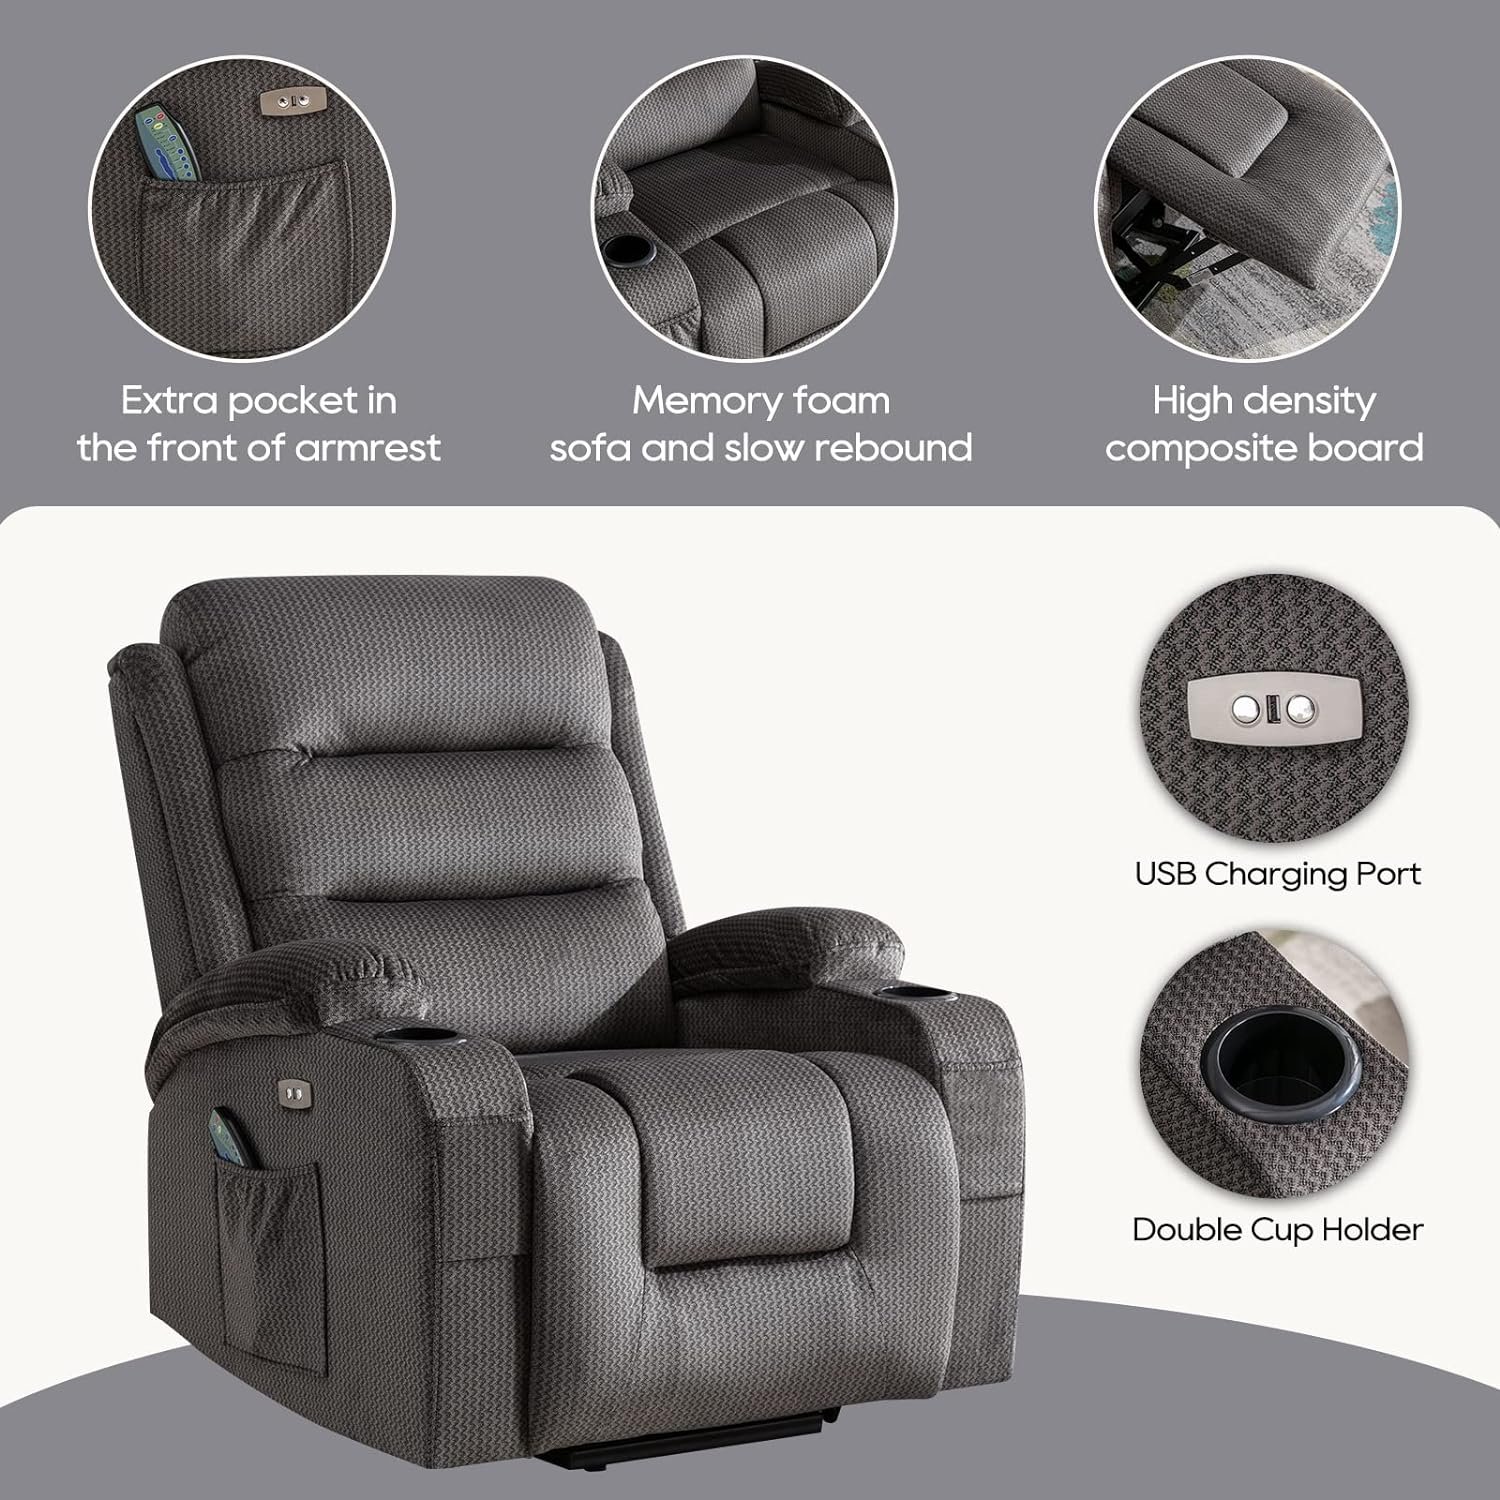 VUYUYU Power Lift Chairs Recliners, Velvet Recliner Chair for Elderly, Heated Vibration Massage Sofa for Living Room, 3 Positions, 2 Pockets and 2 Cup Holders (Velvet-Brown)